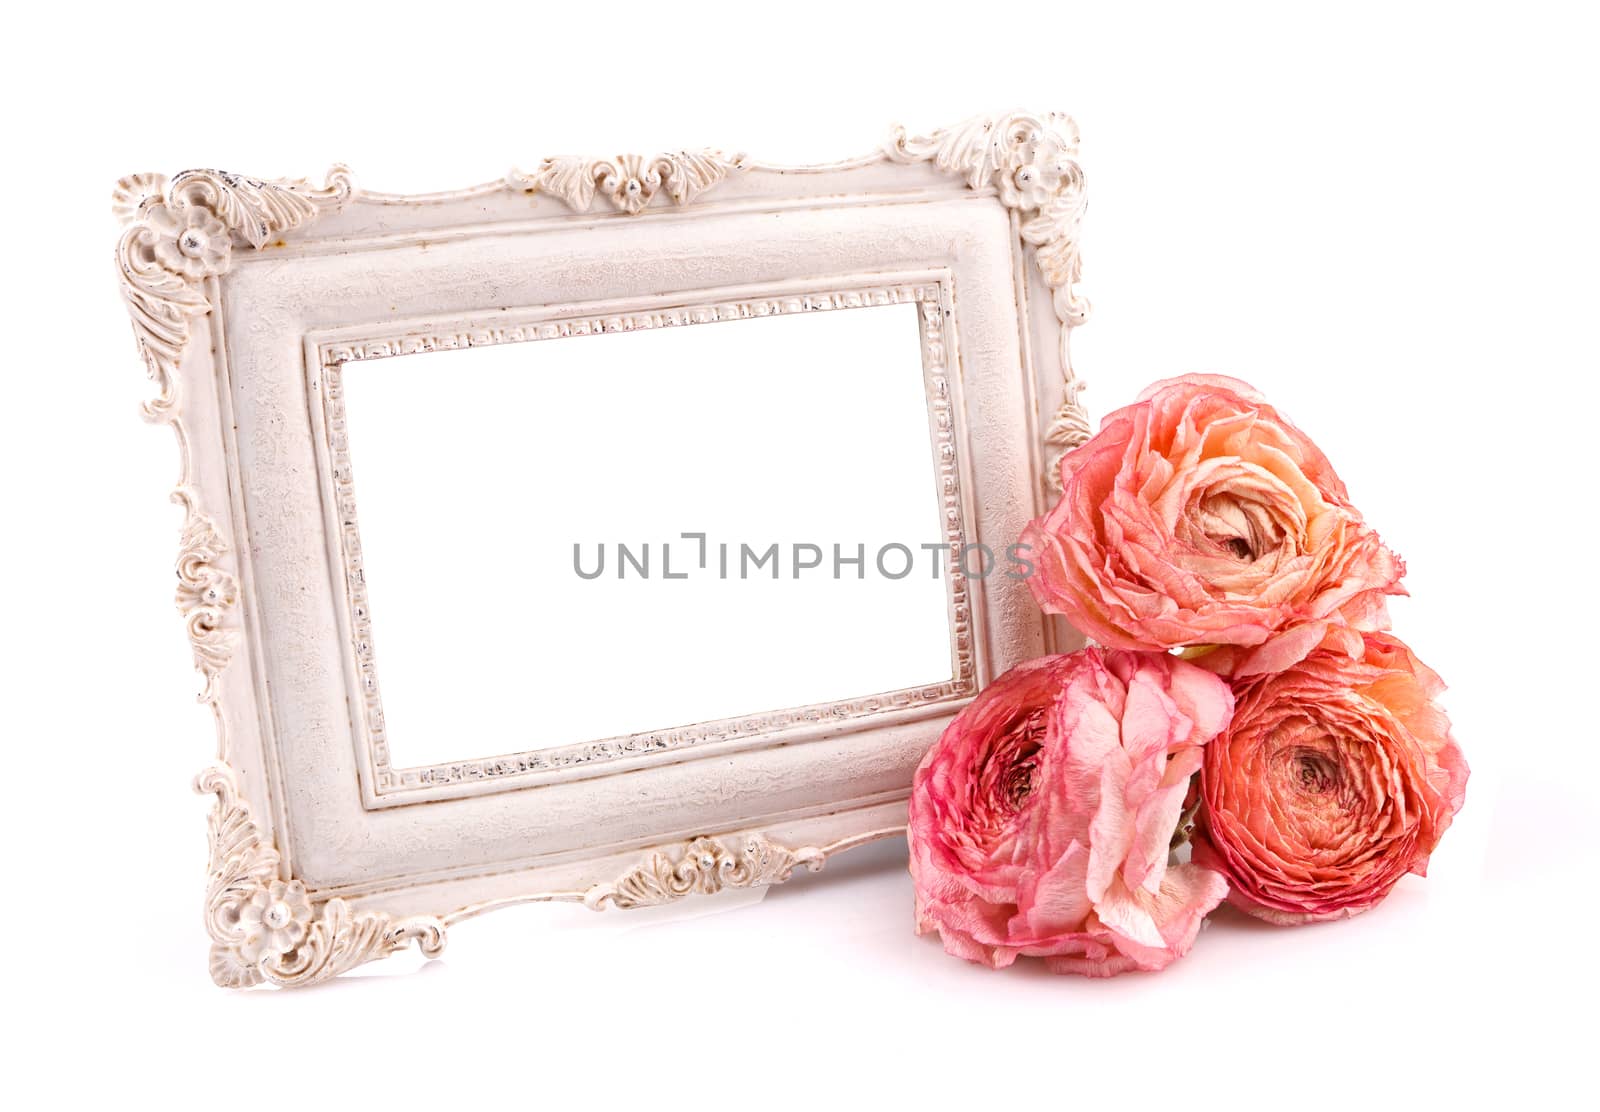 empty vintage frame with dry rose